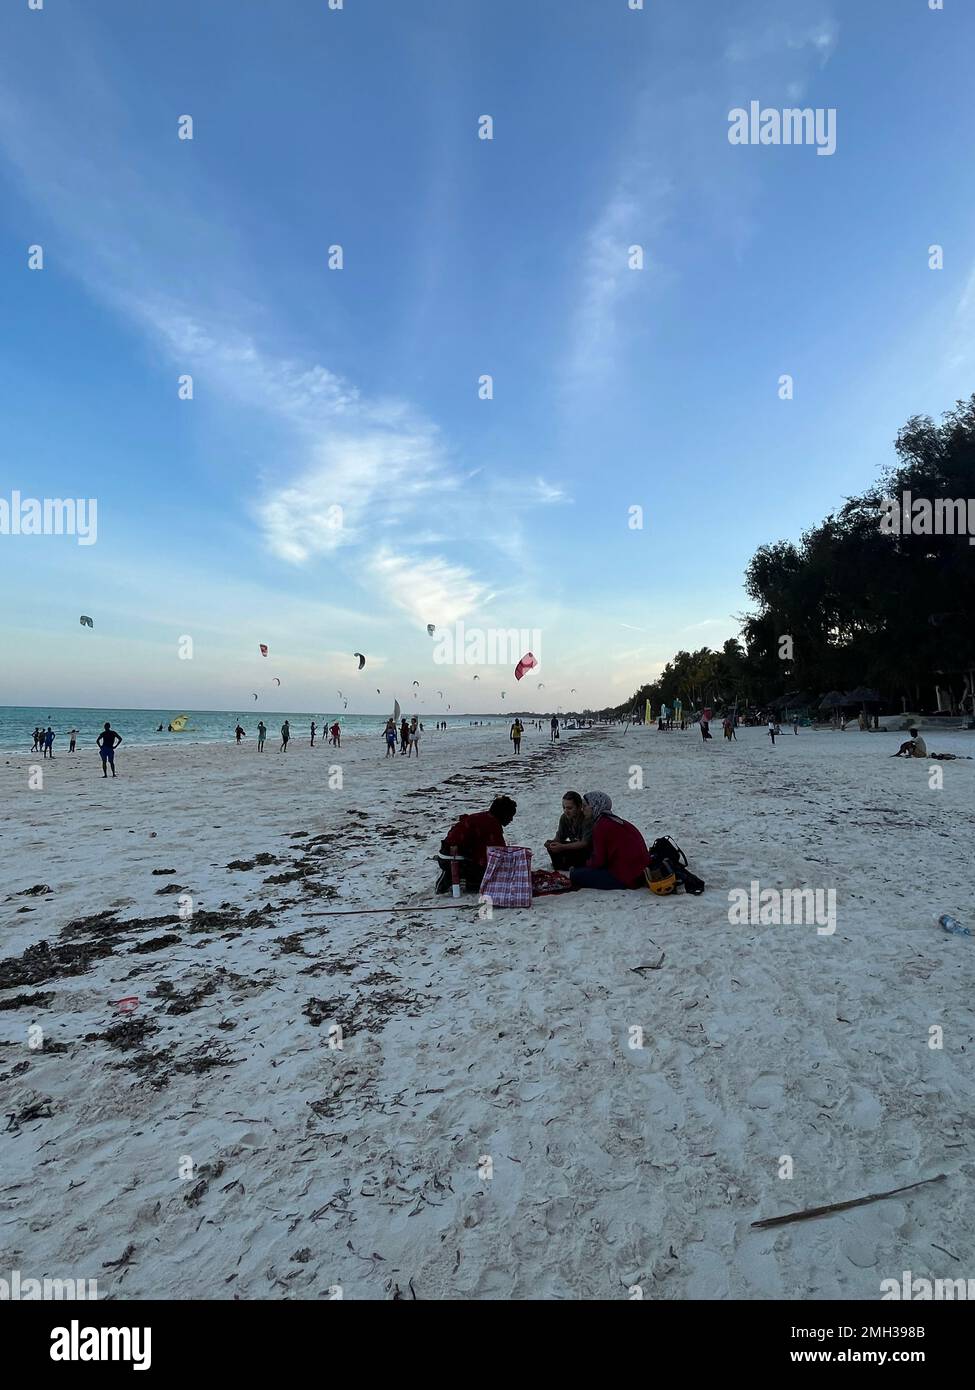 Many people use kites in front of the beach, and one family sits on the white sand watching the beach in Zanzibar, Tanzania. Stock Photo